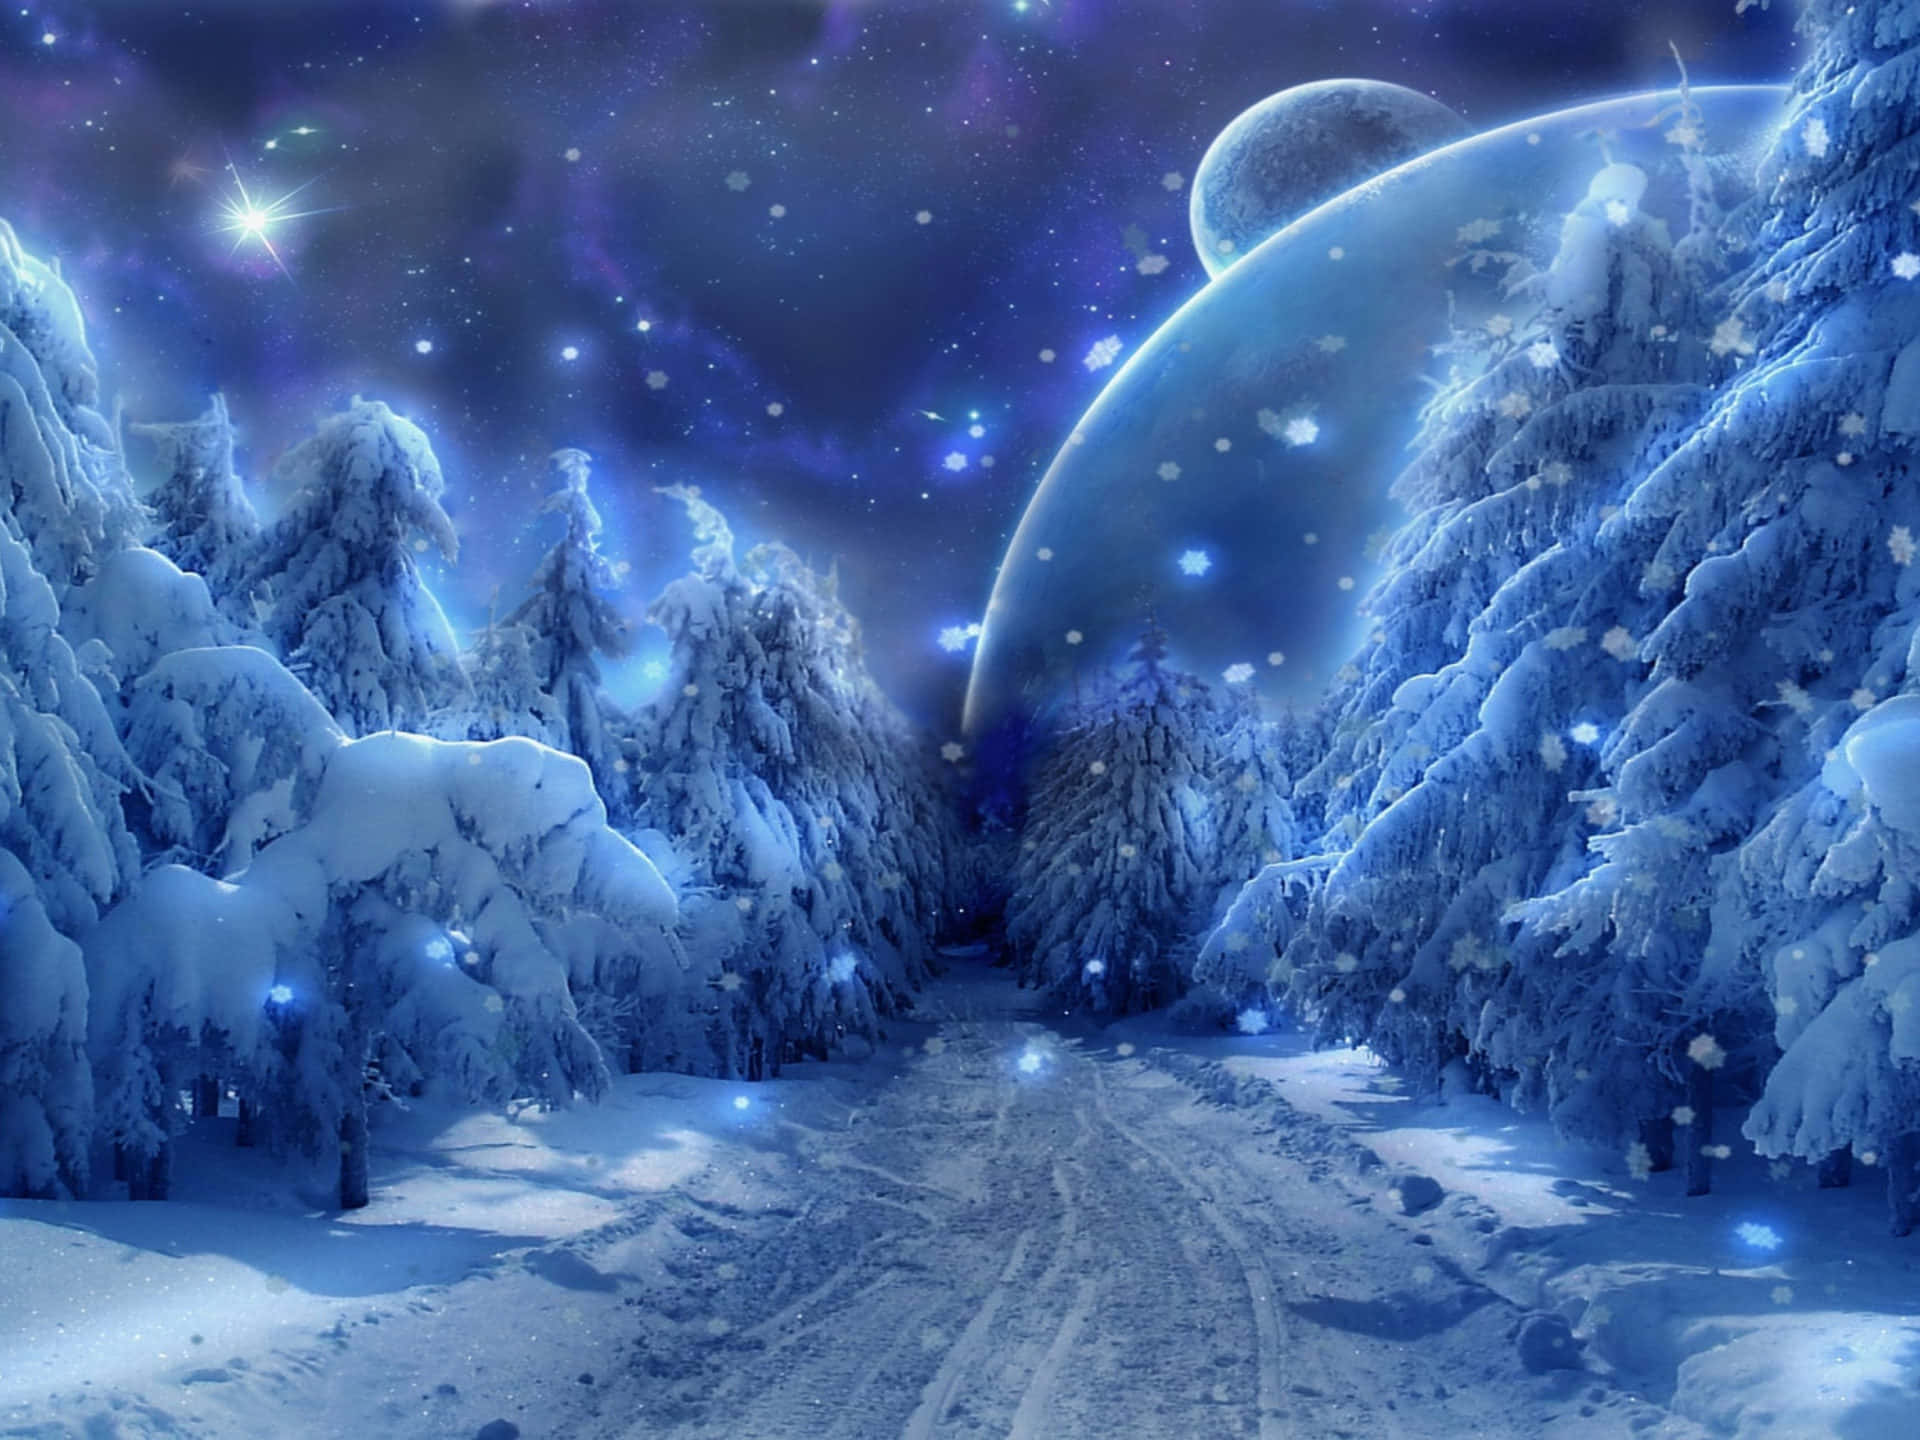 Star Sky Over Snowy Forest Wallpaper